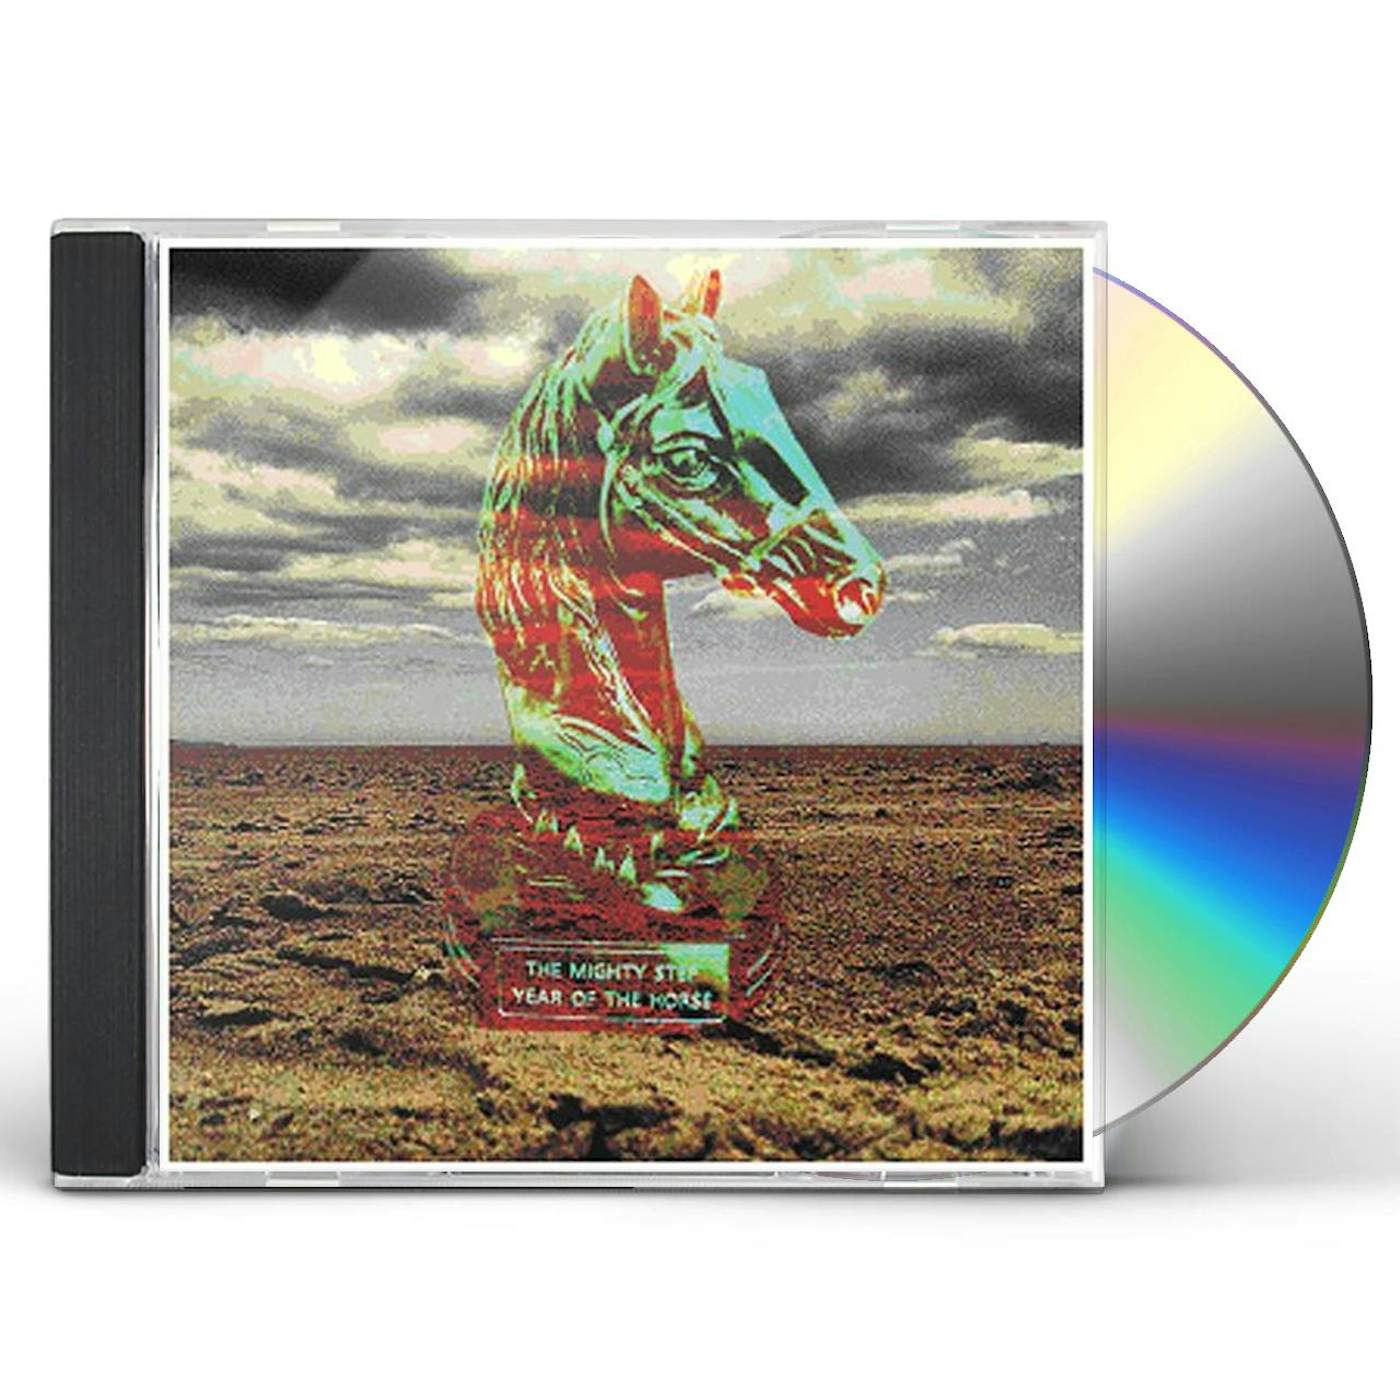 The Mighty Stef YEAR OF THE HORSE CD